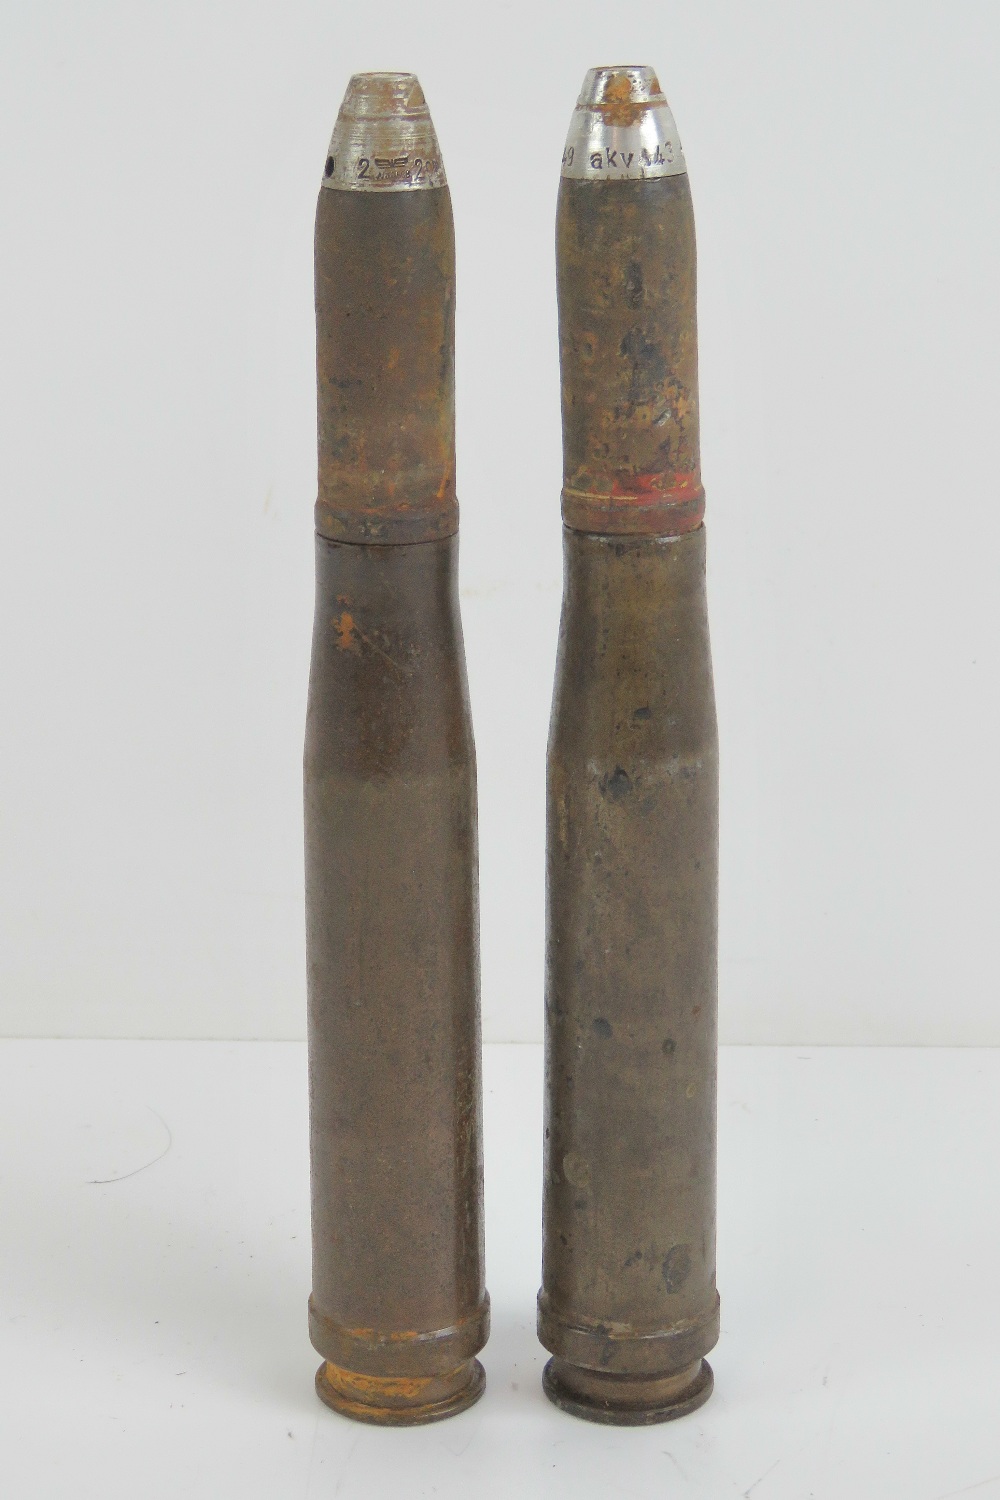 Two German 20mm inert shells with heads.